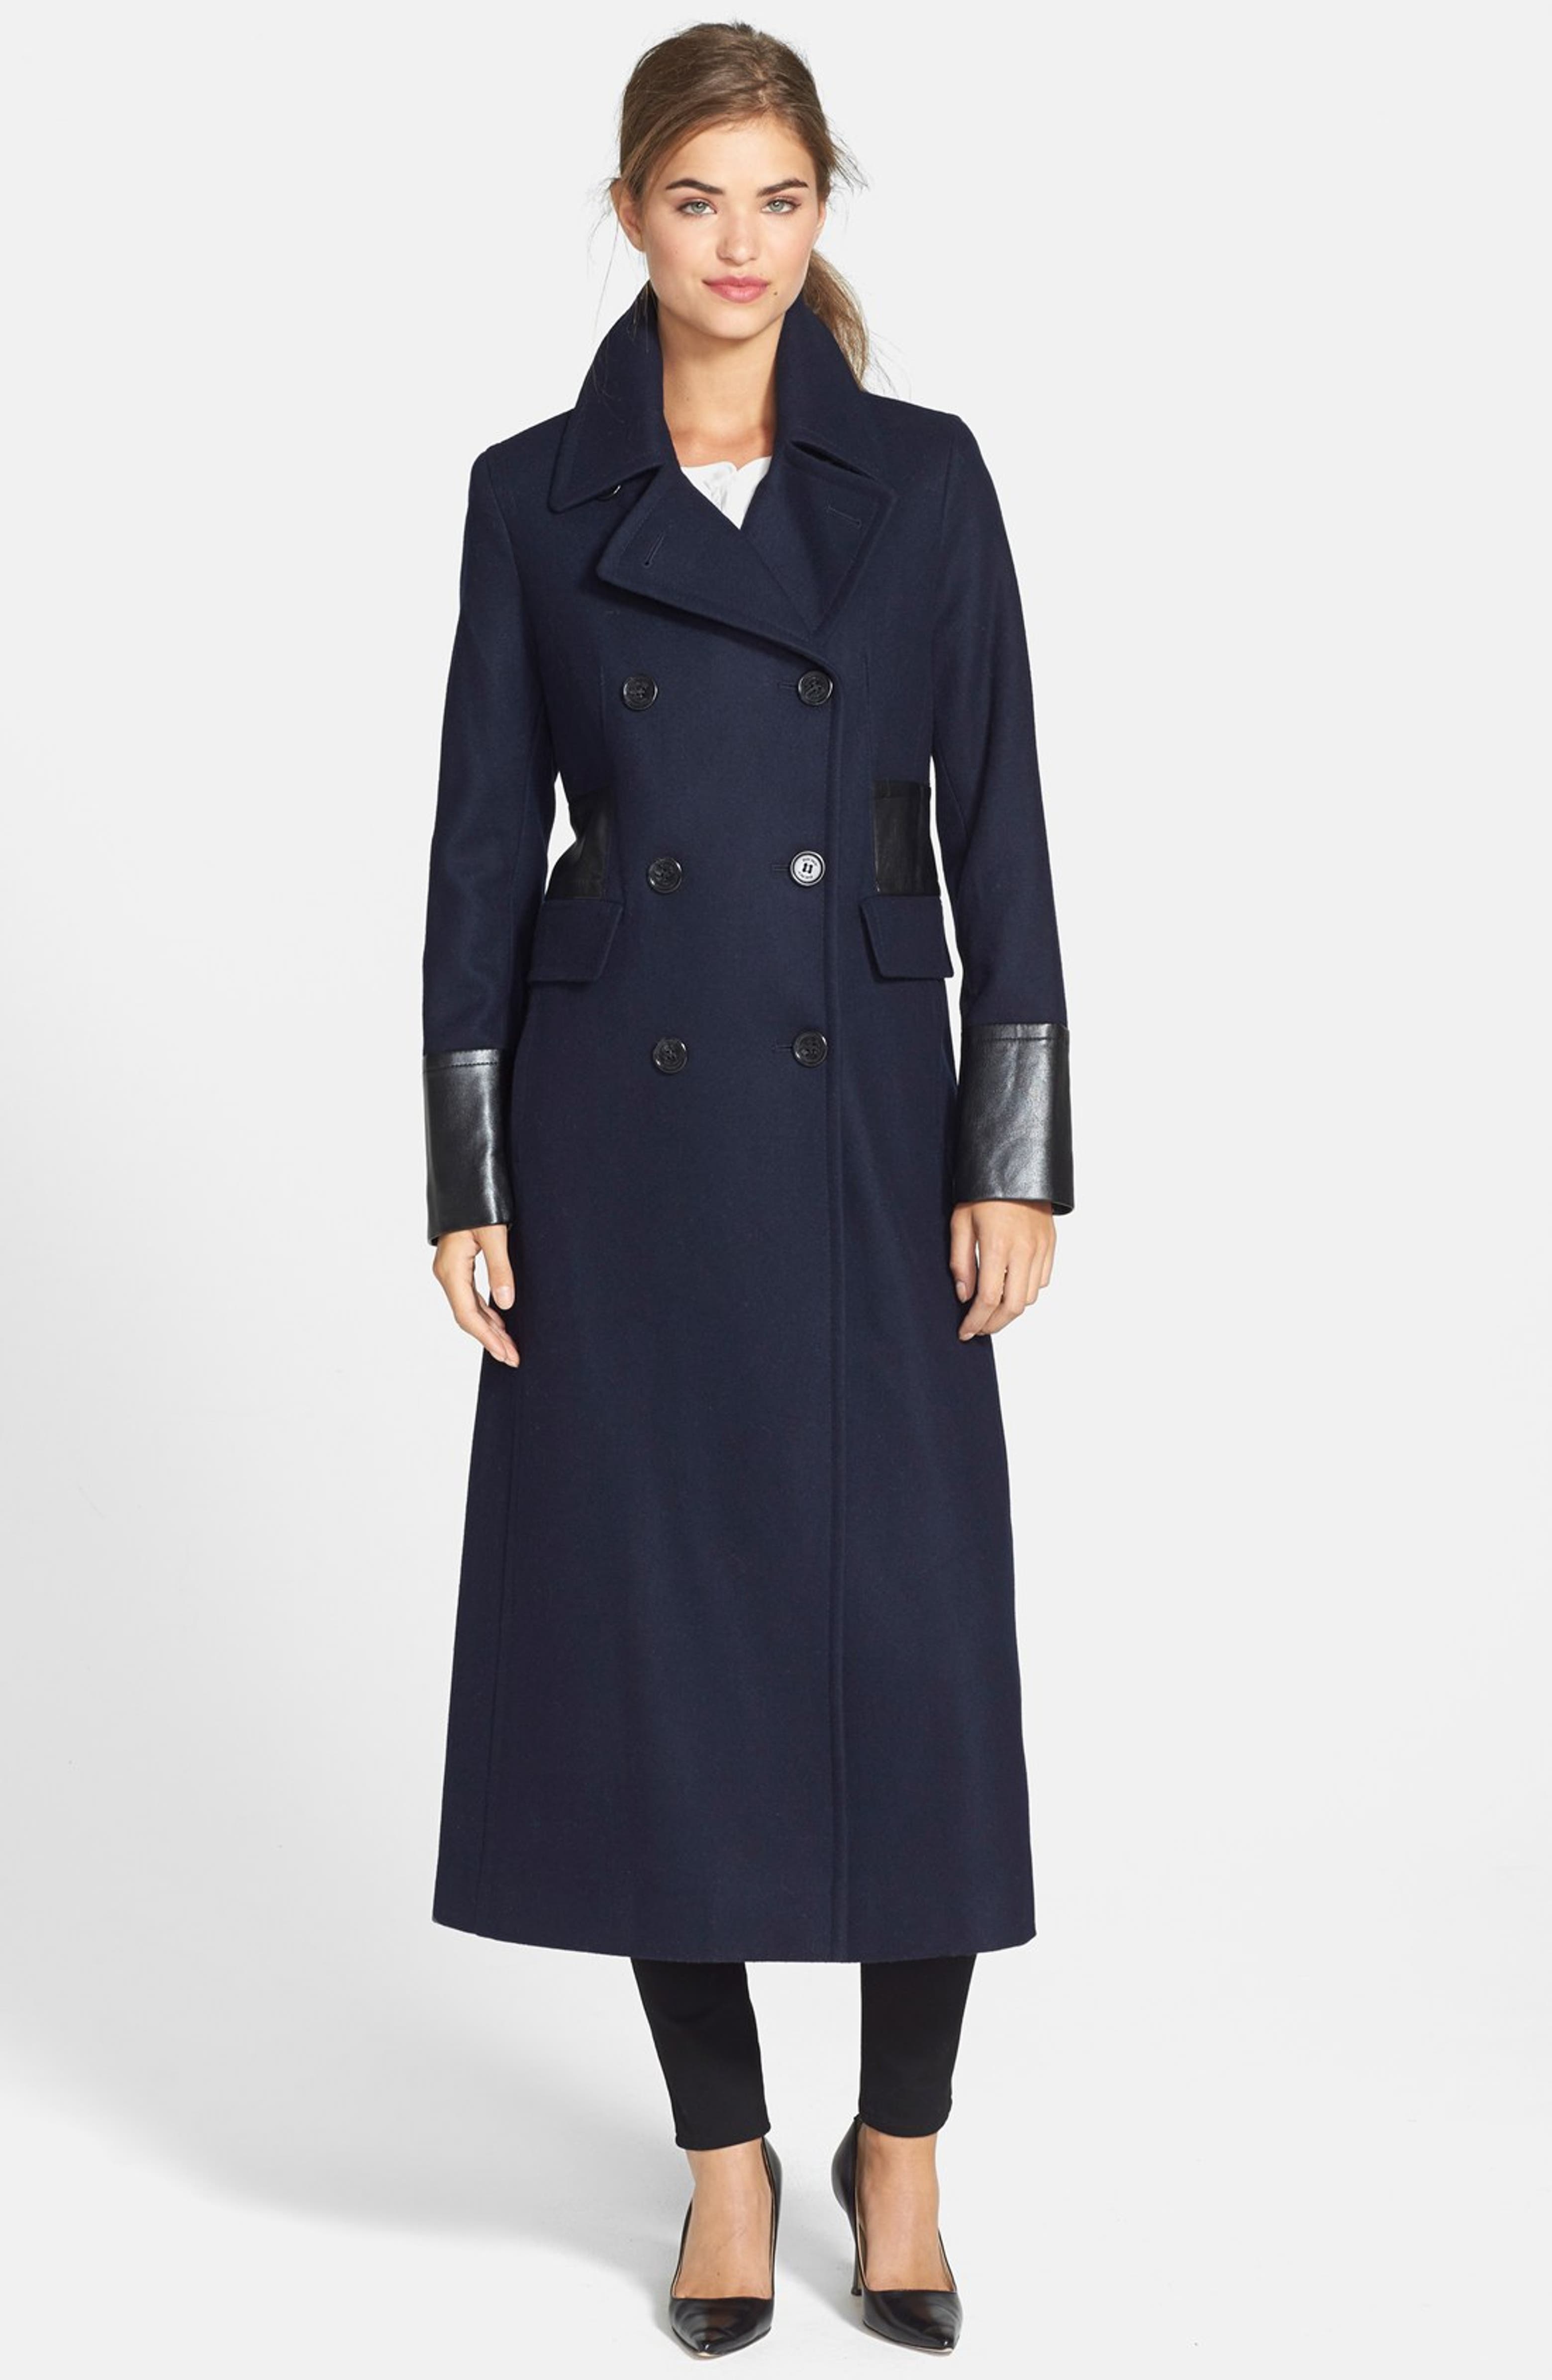 DKNY Long Double Breasted Wool Blend Coat with Faux Leather Trim ...